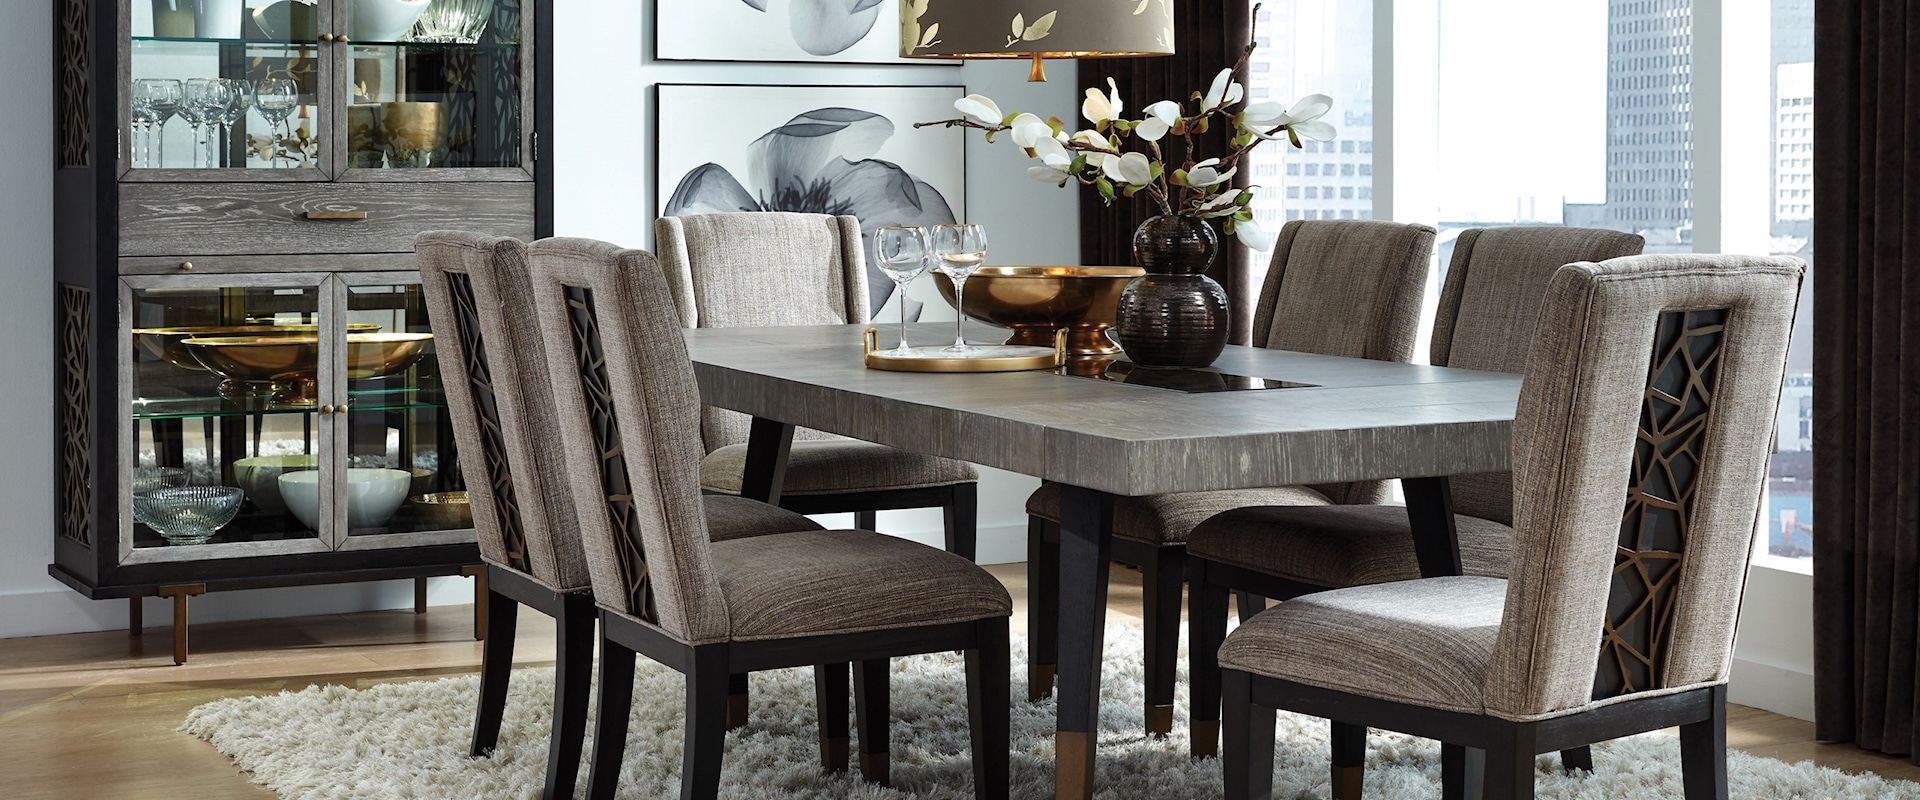 Transitional 8-Piece Formal Dining Set with Upholstered Chairs and Glass China Cabinet